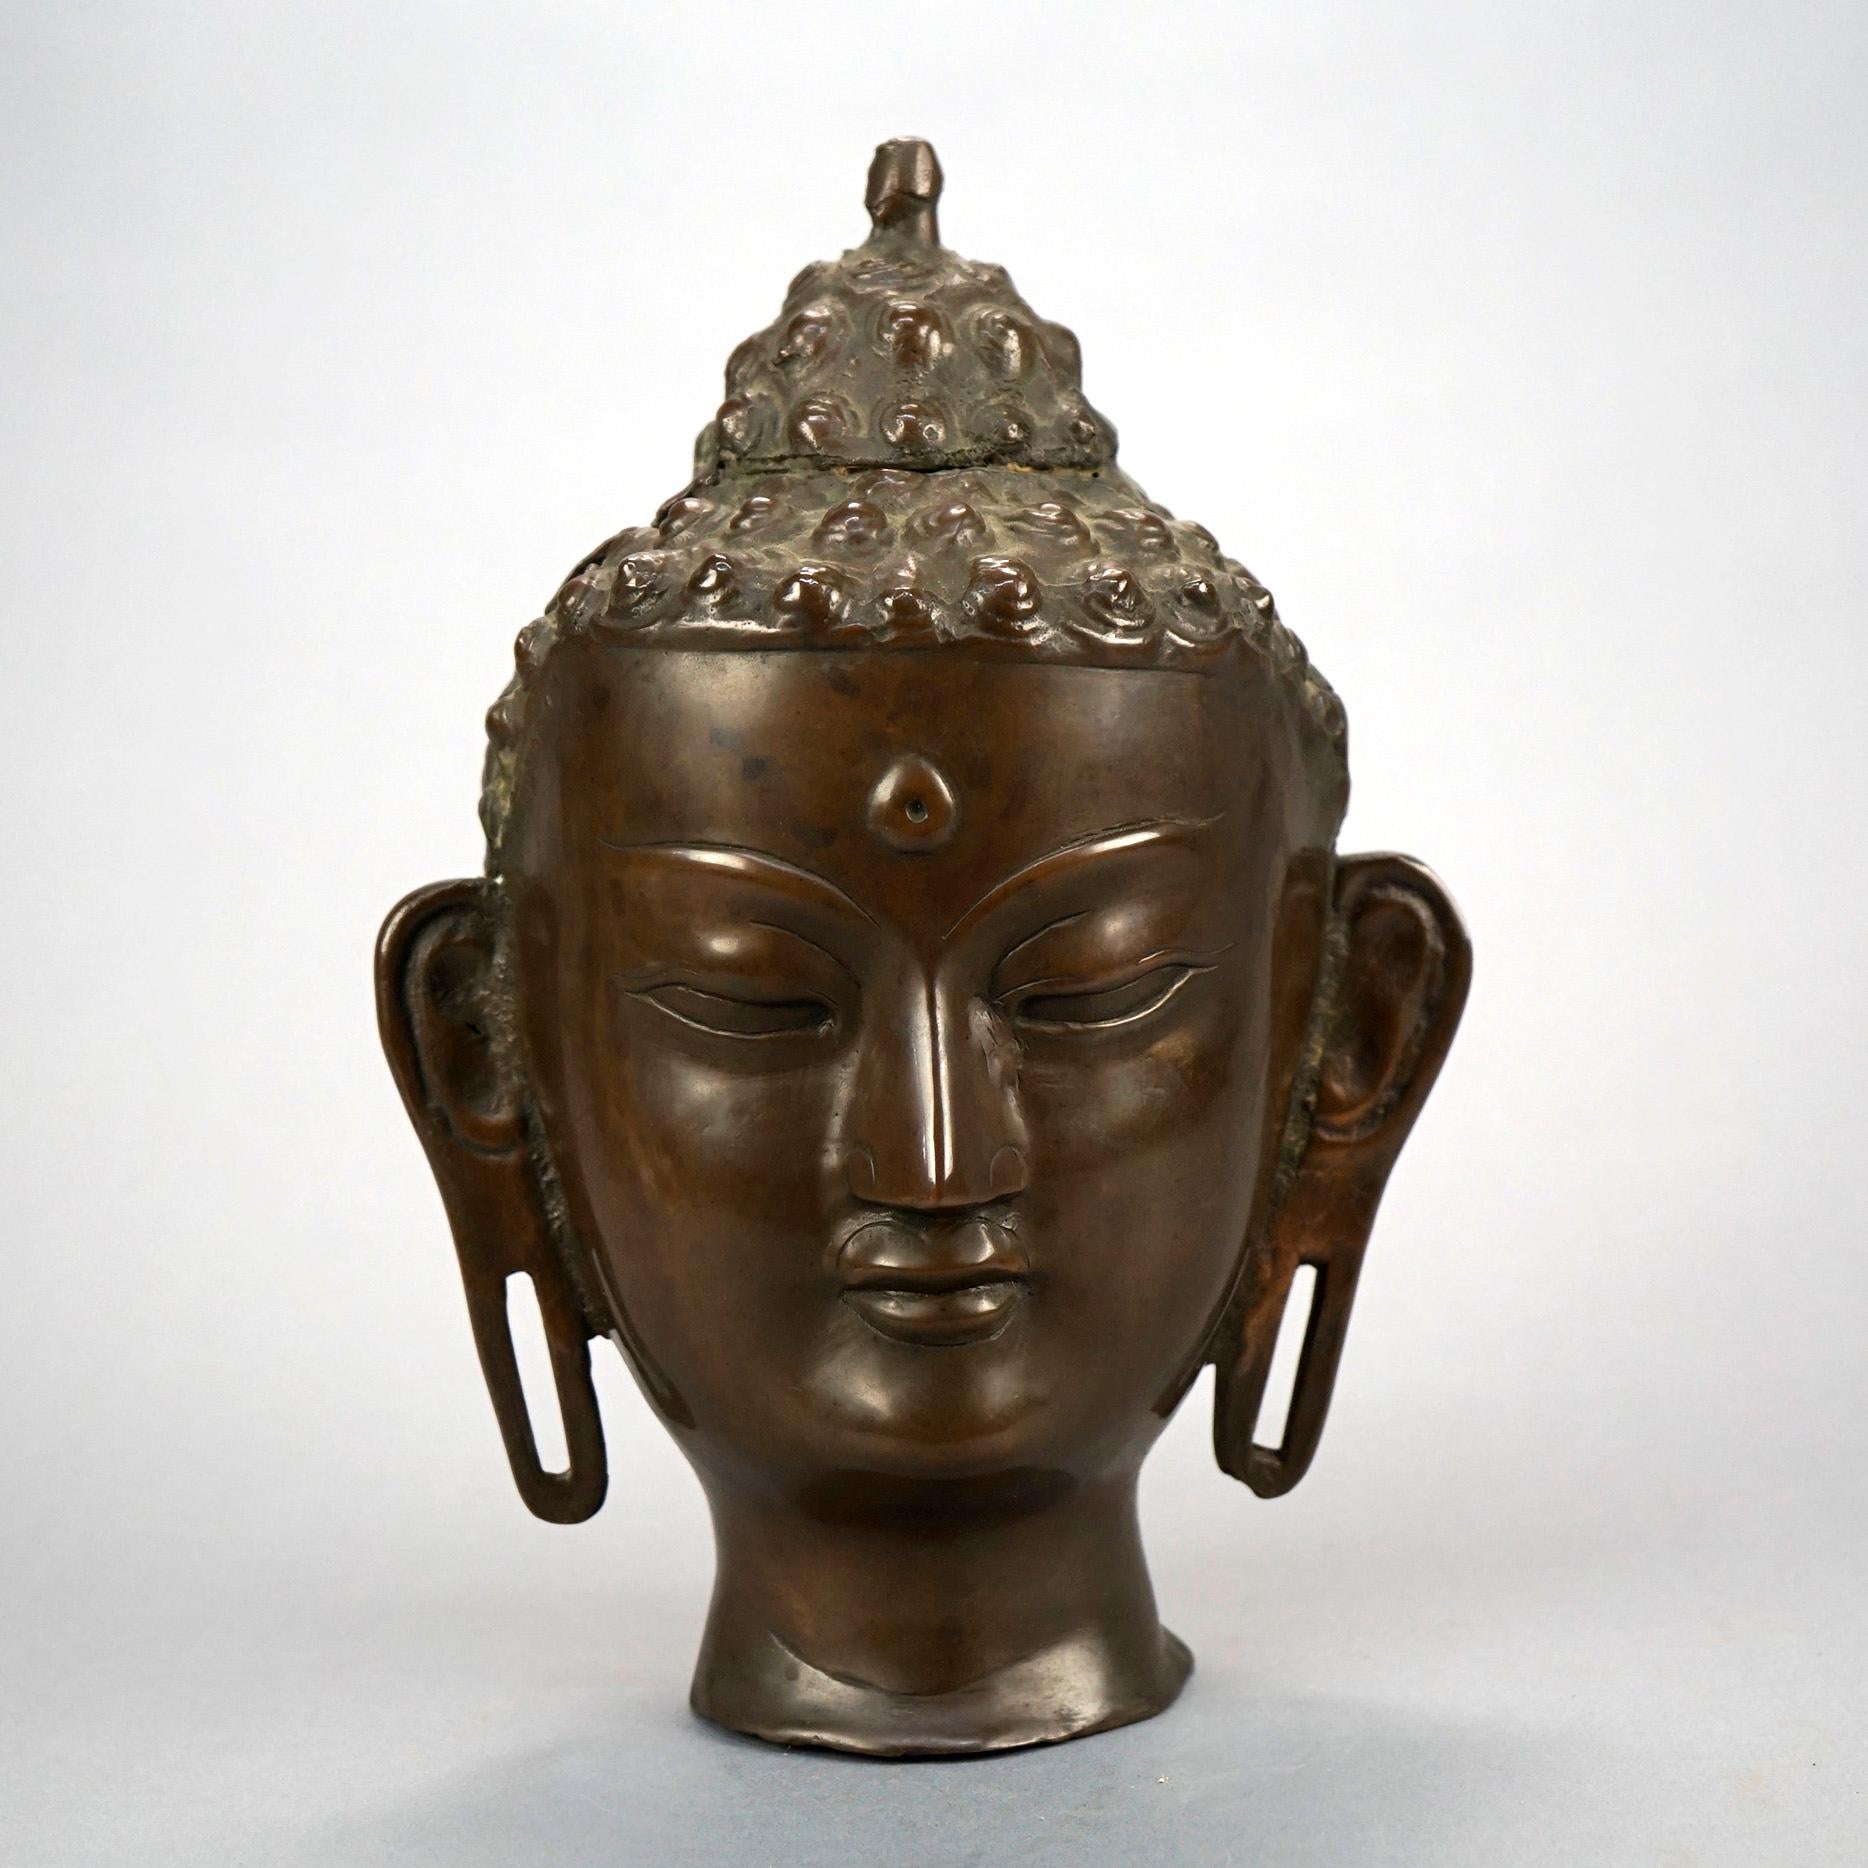 An Asian cast bronze figural sculpture of a Shiva bust, 20th century

Measures- 10.75'' H x 7.5'' W x 6'' D.

Catalogue Note: Ask about DISCOUNTED DELIVERY RATES available to most regions within 1,500 miles of New York.